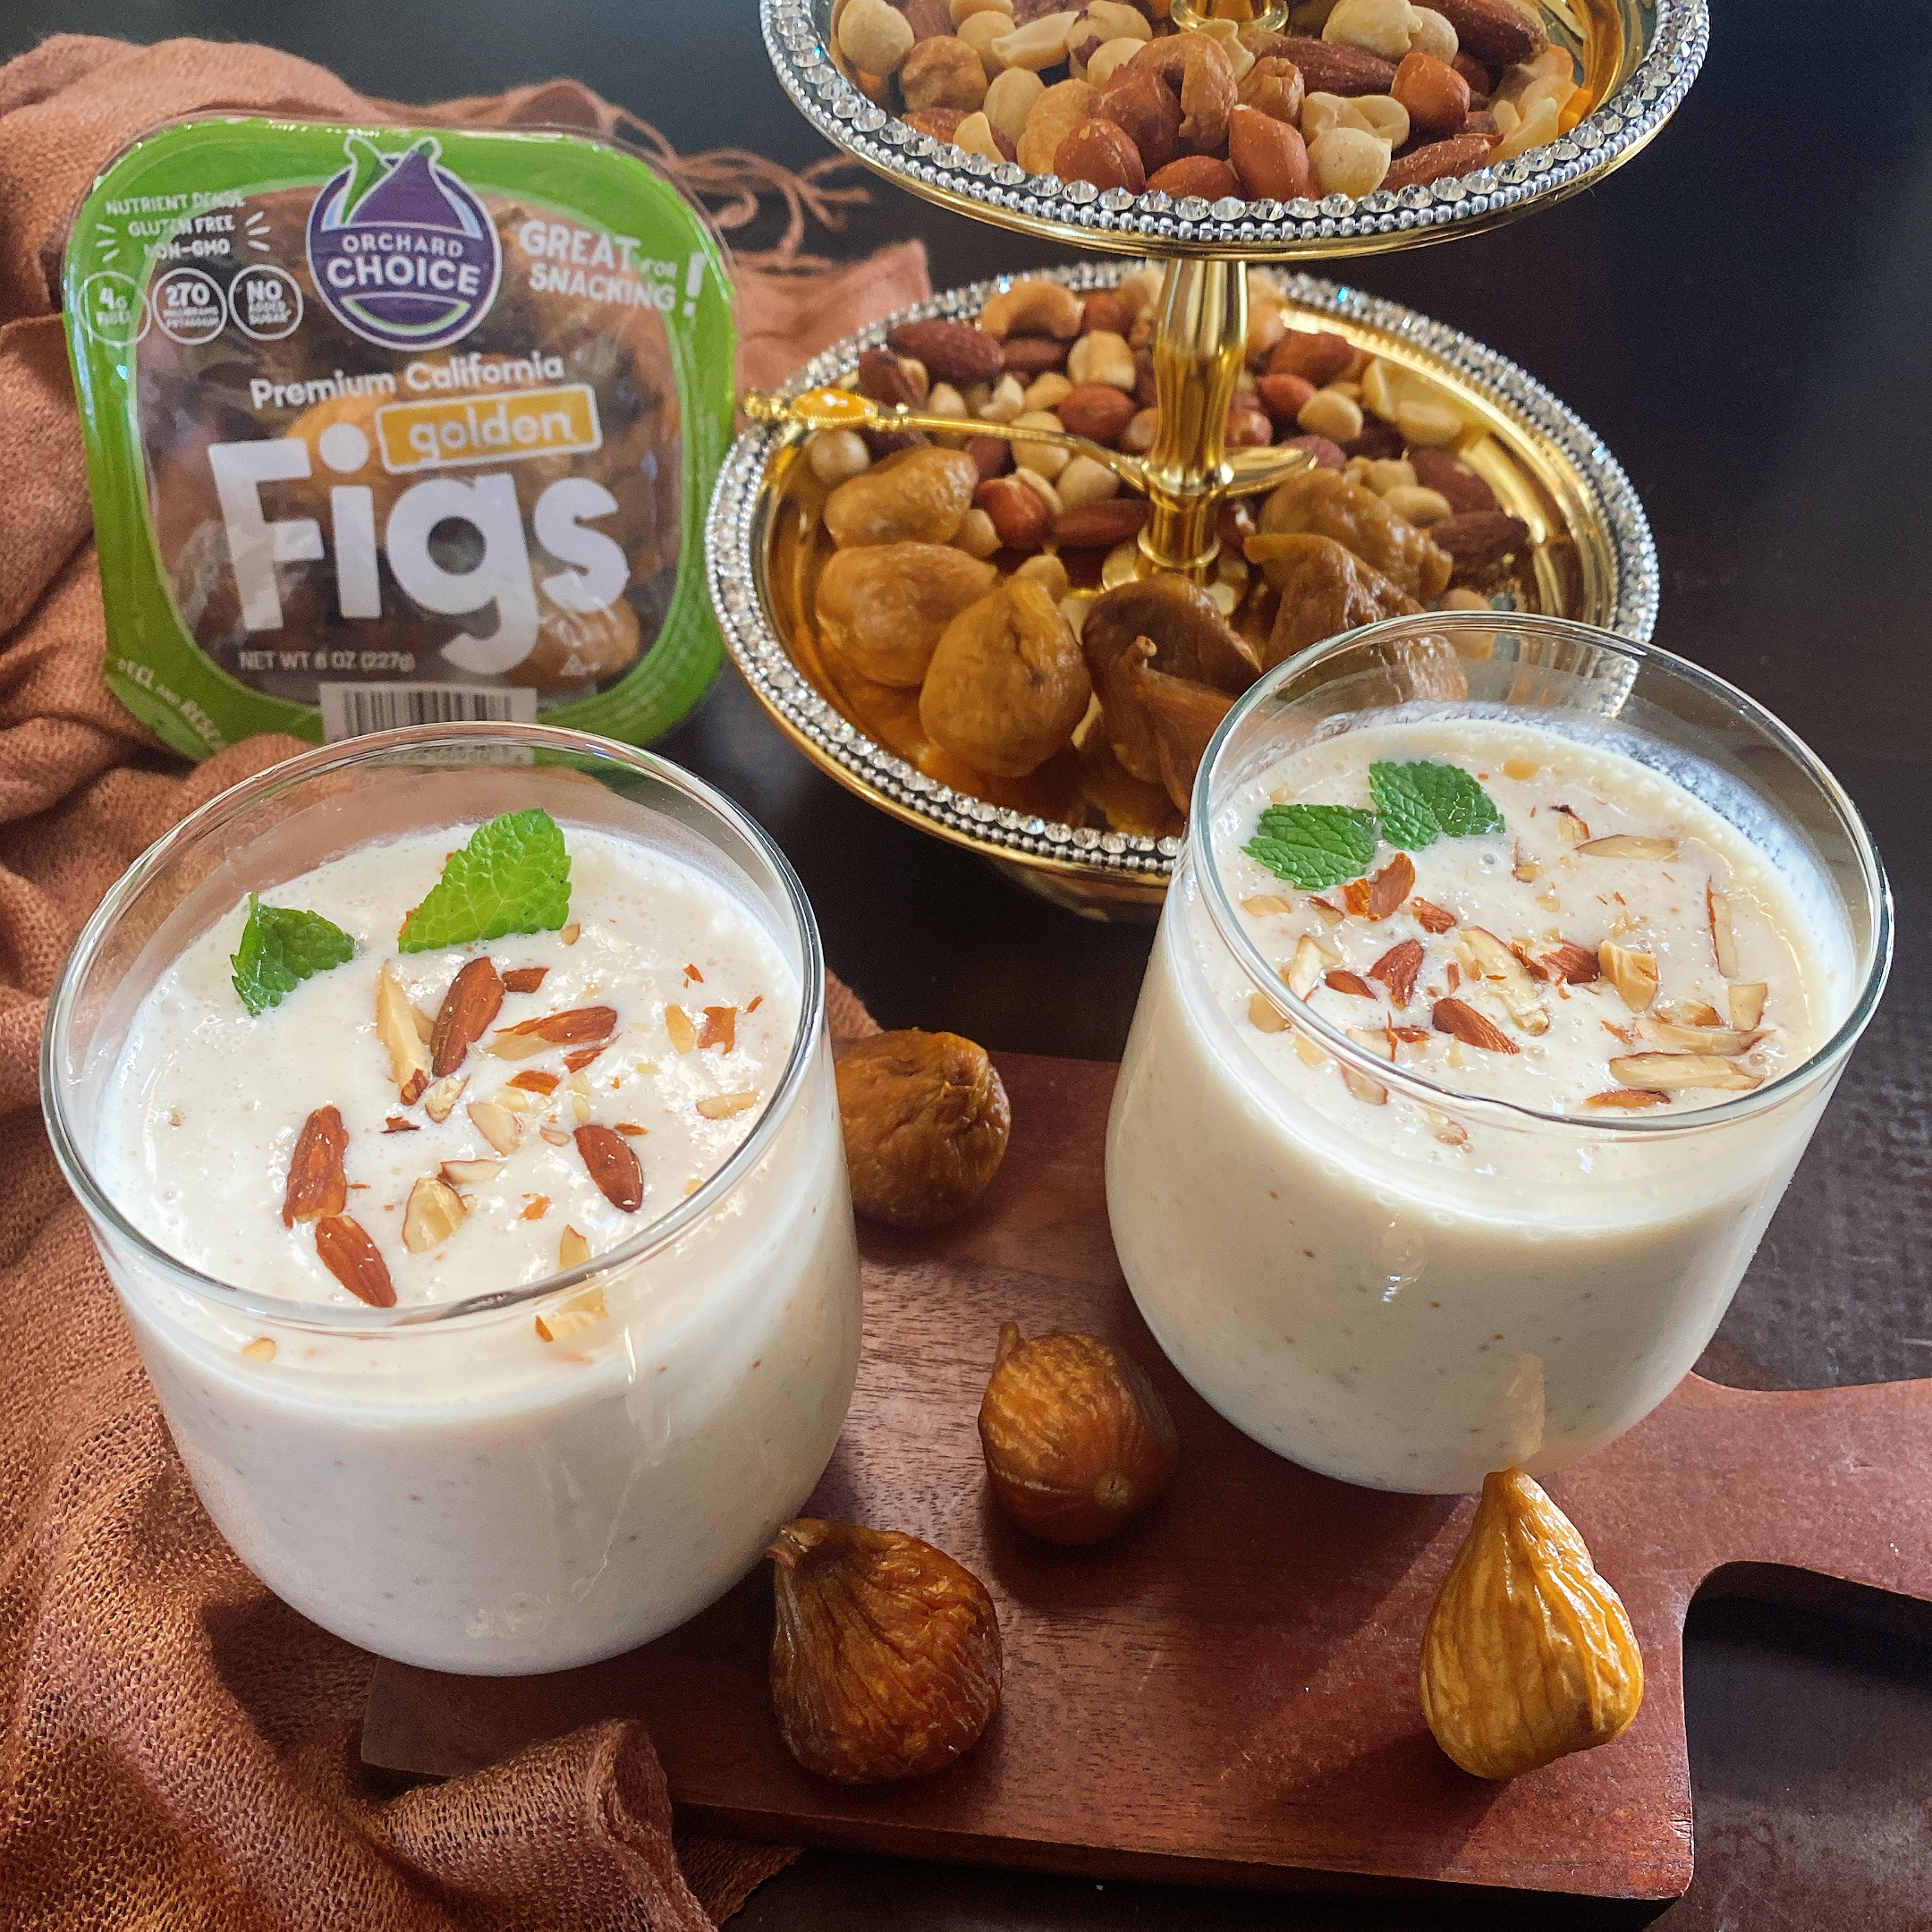 Two cups of fig lassi, a Yogurt drink with figs on a table surrounded by Golden Figs.